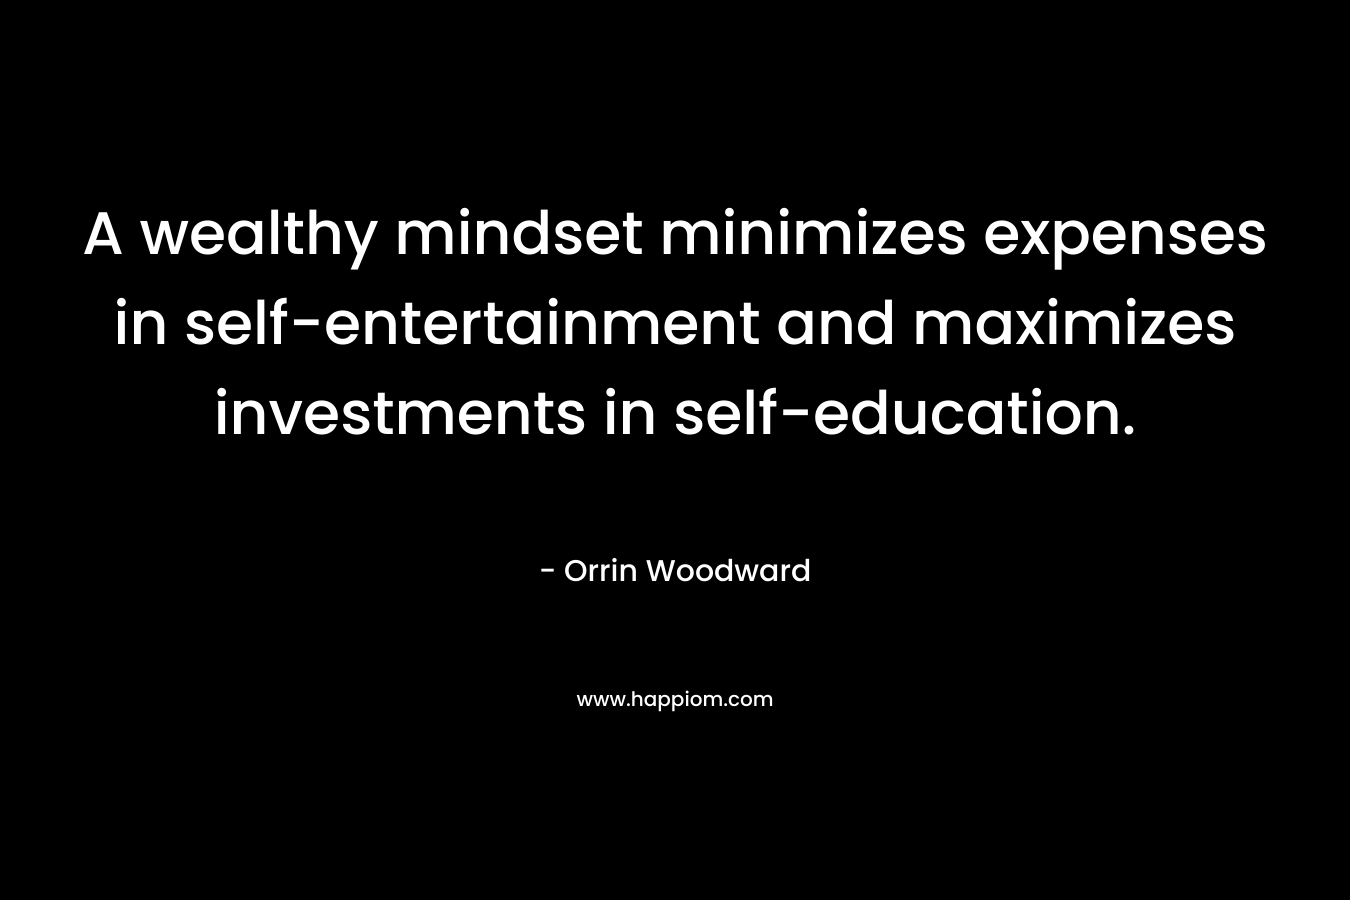 A wealthy mindset minimizes expenses in self-entertainment and maximizes investments in self-education. – Orrin Woodward